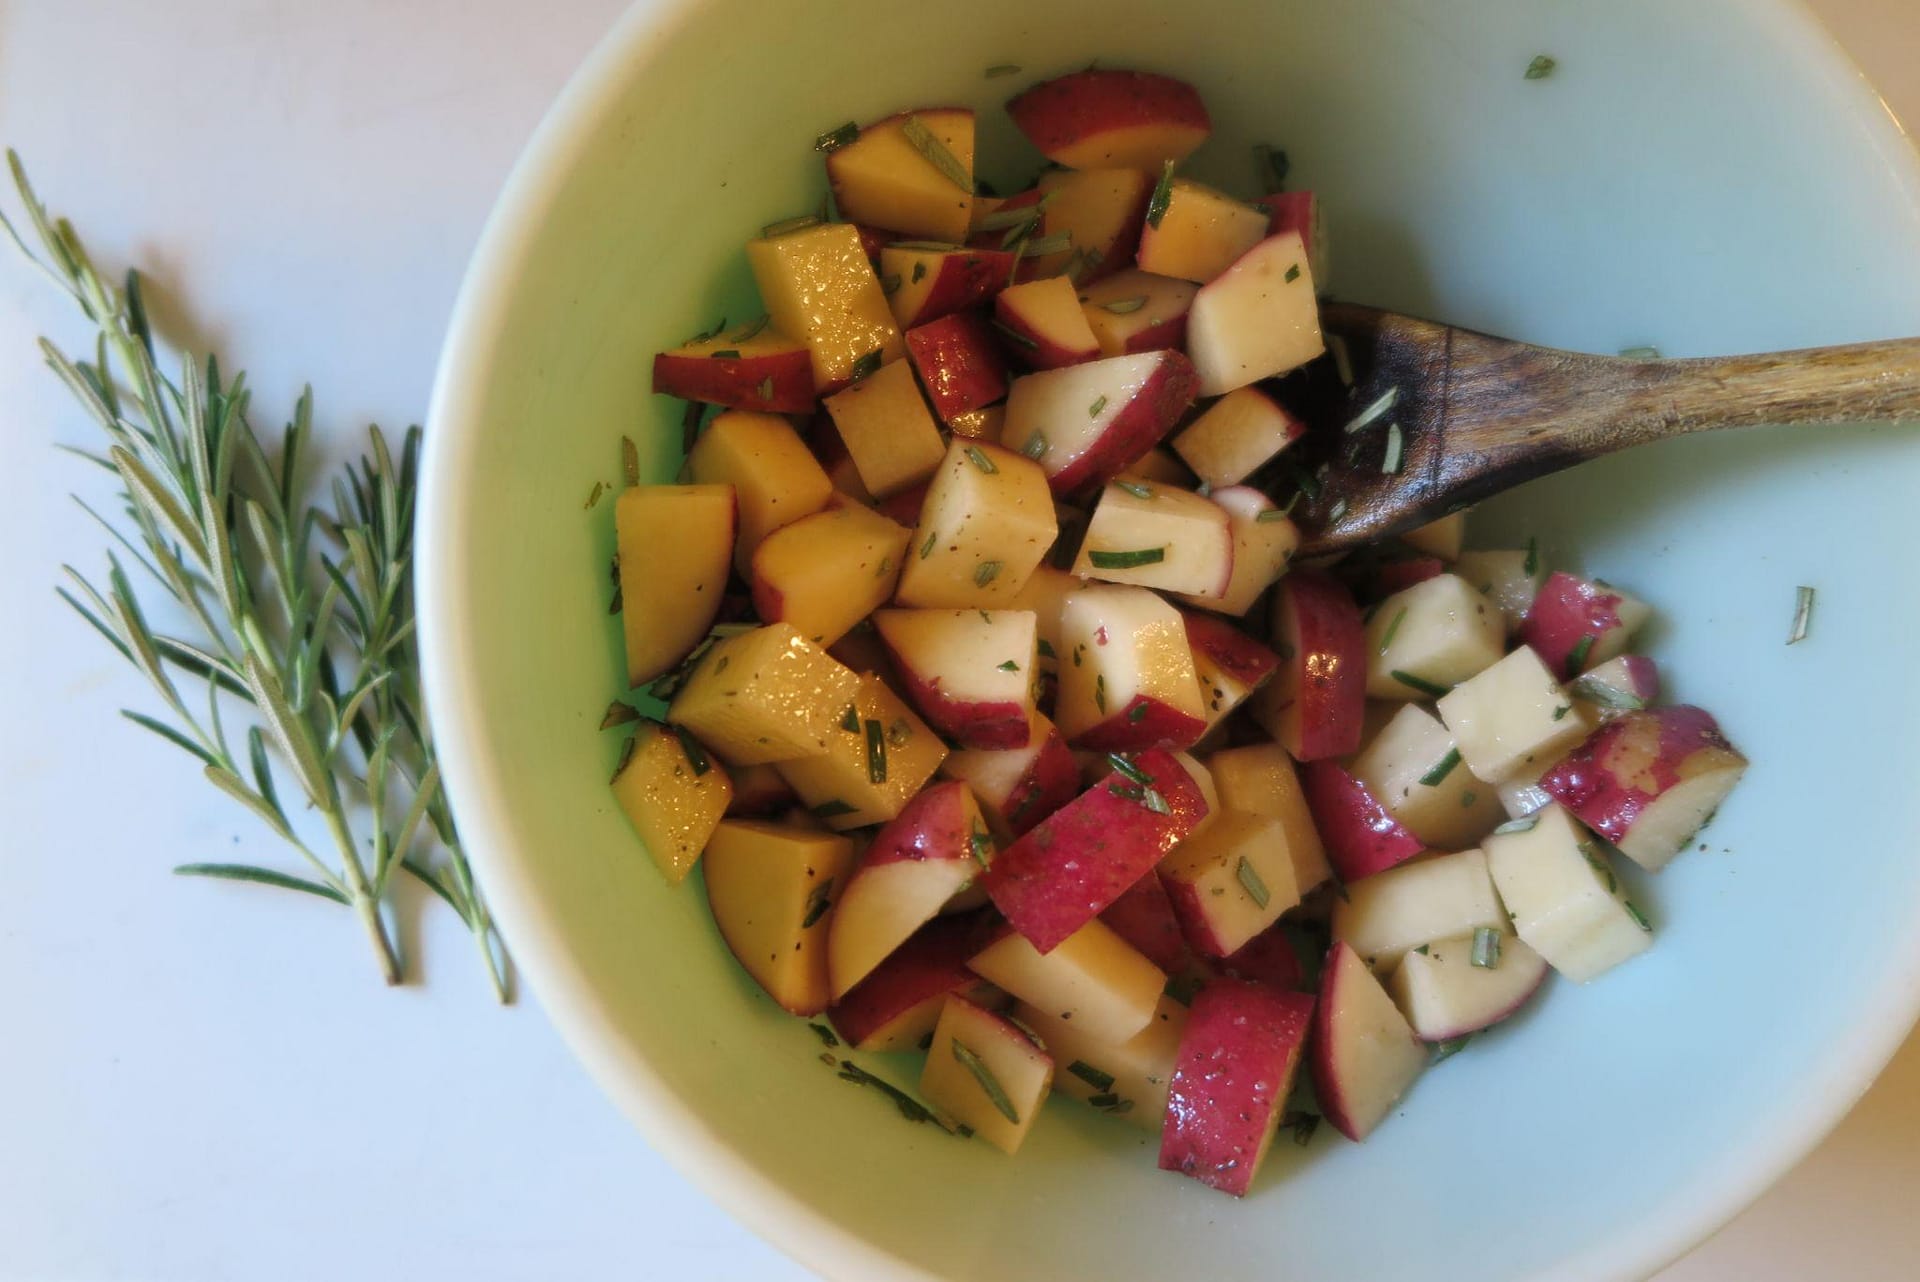 Cut uncooked potatoes tossed in oil and rosemary in a pale green bowl with a wooden spoon